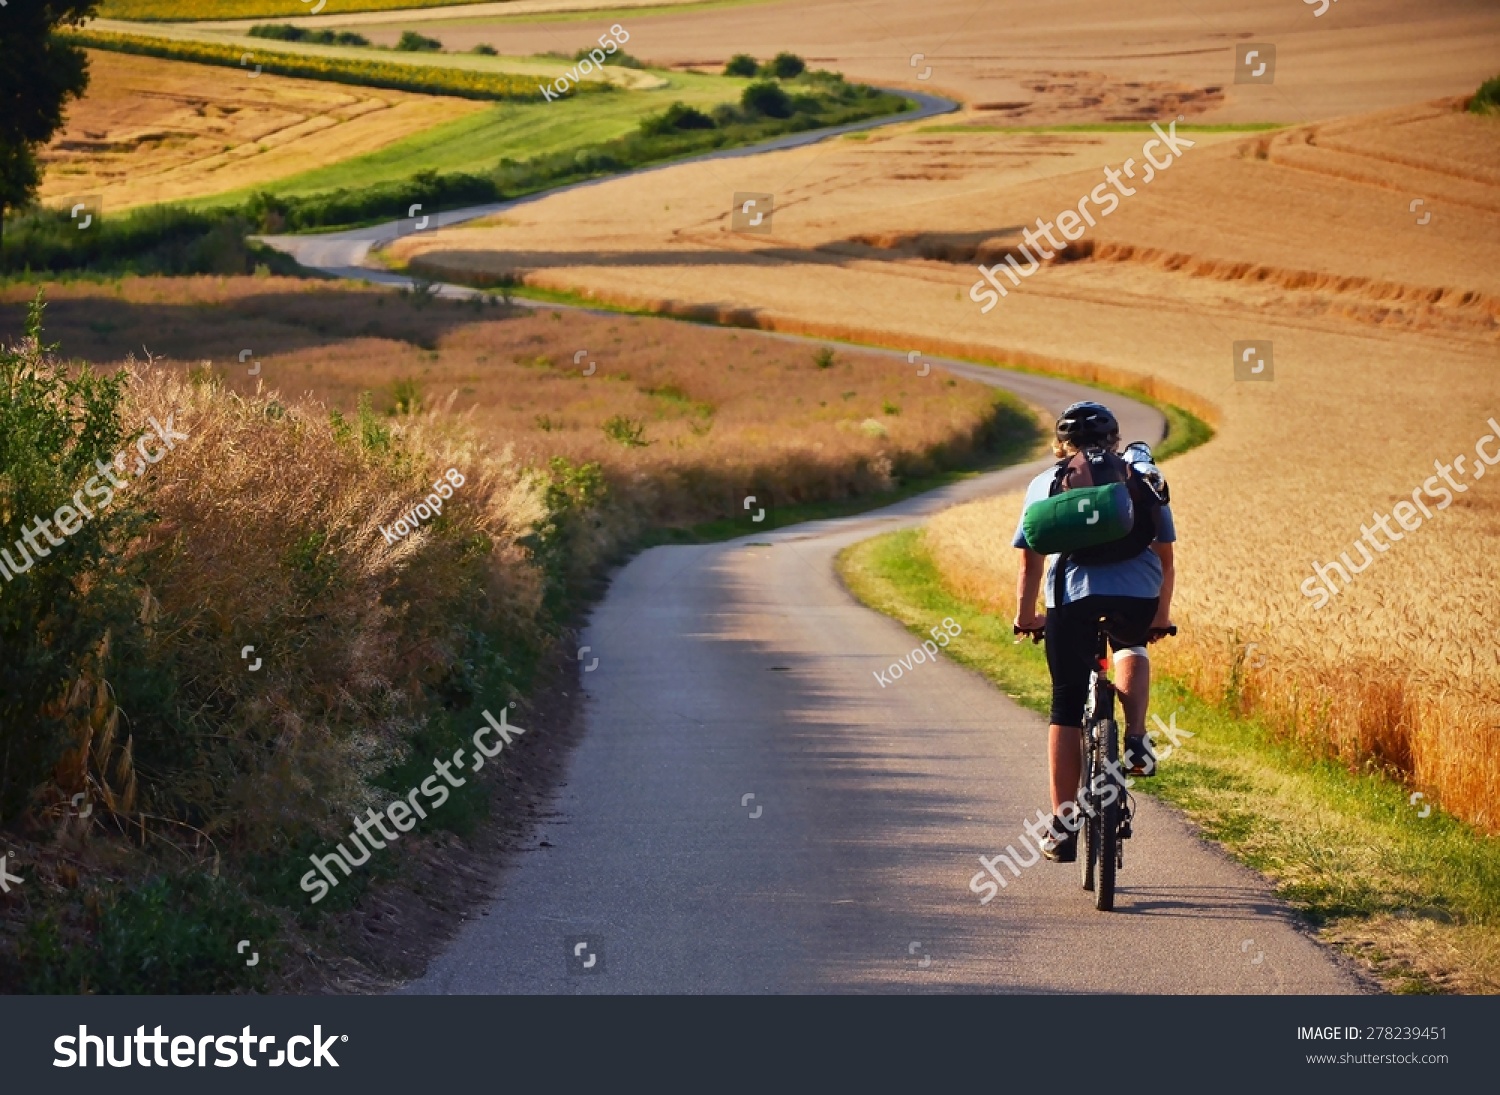 Biker riding on cycling road through summer agricultural fields which are full of gold wheat #278239451